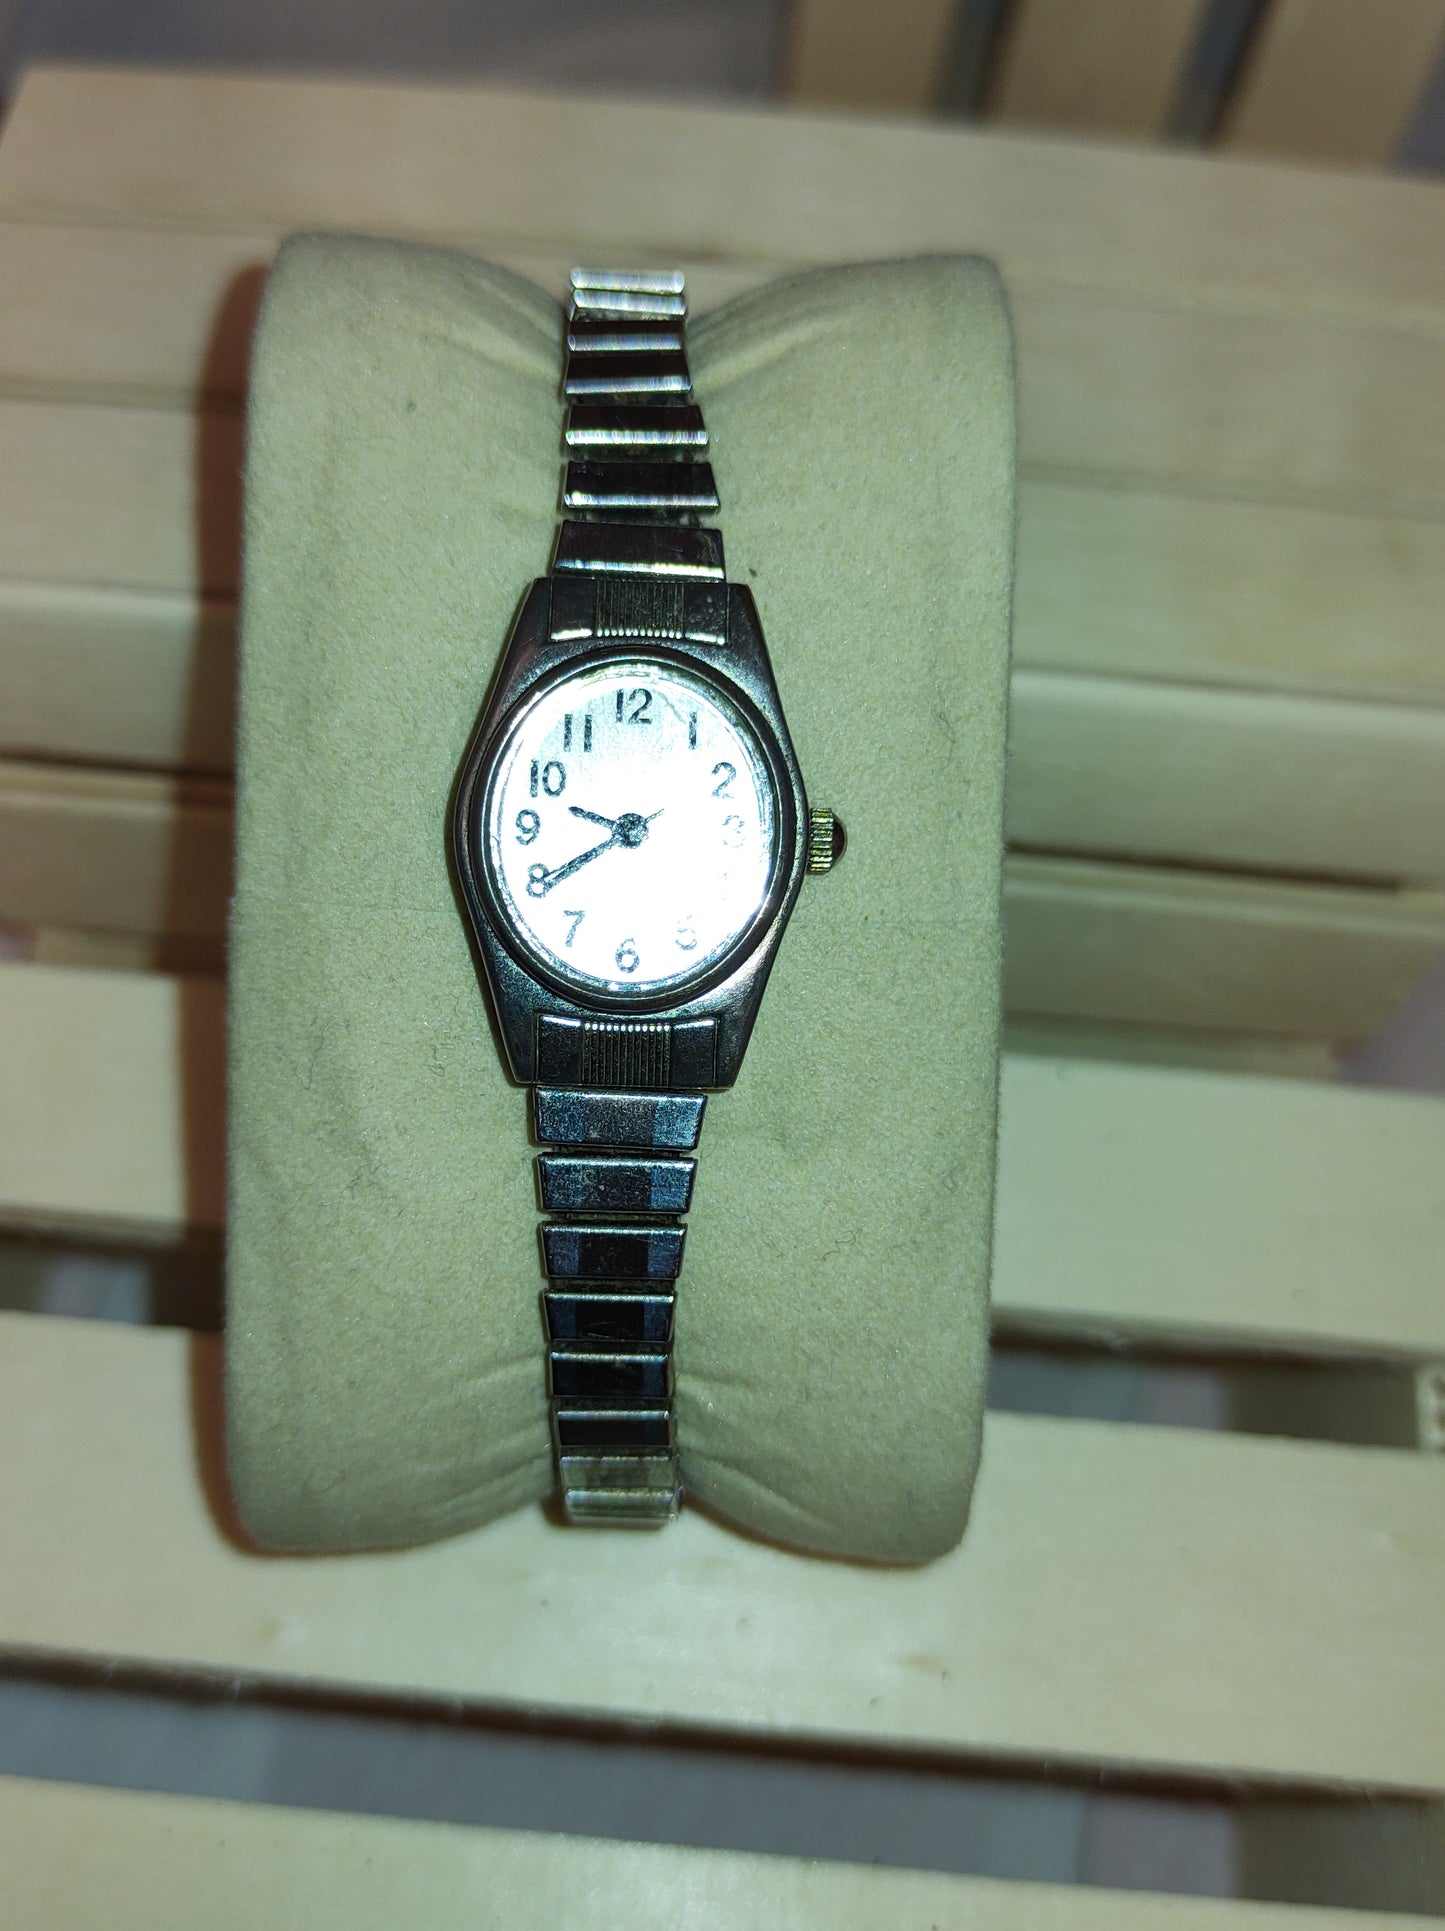 Simple pre-owned ladies stainless steel with white dial .steel band runs well every day watch